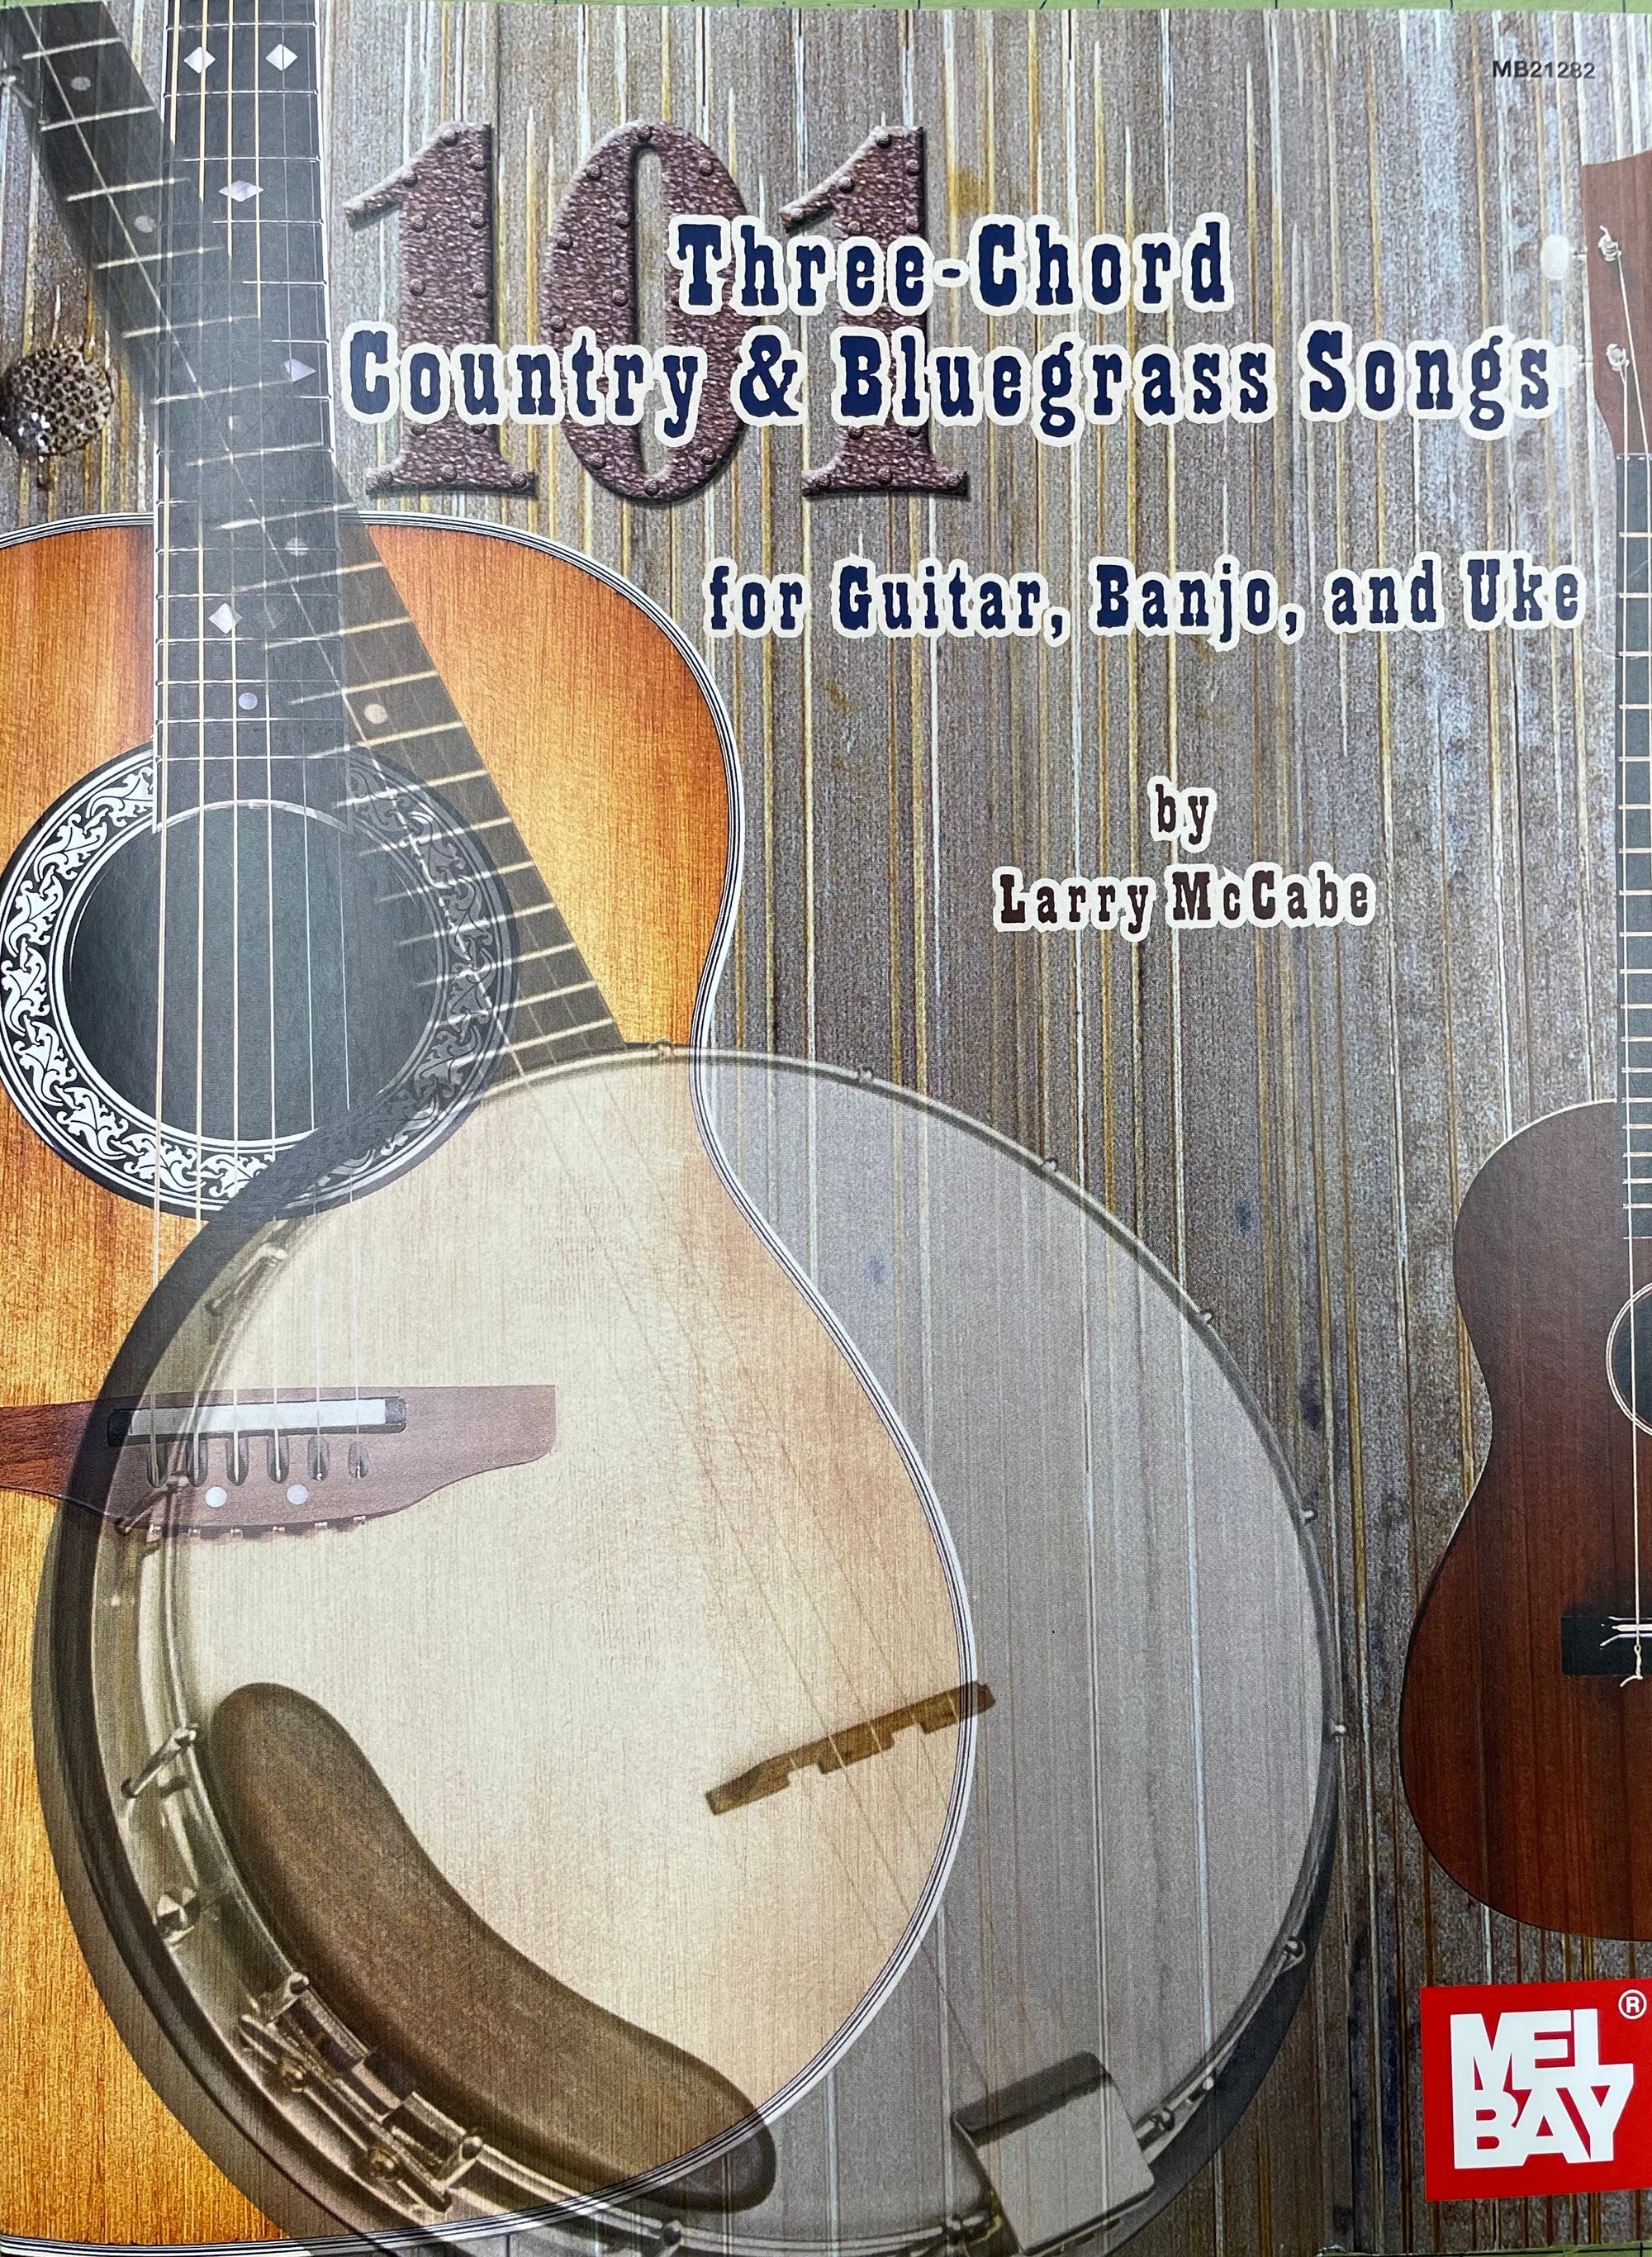 A music book titled "101 Three-Chord Country & Bluegrass Songs for Guitar, Banjo, and Uke" by Larry McCabe, displayed with a guitar and banjo, includes chords with diagrams.